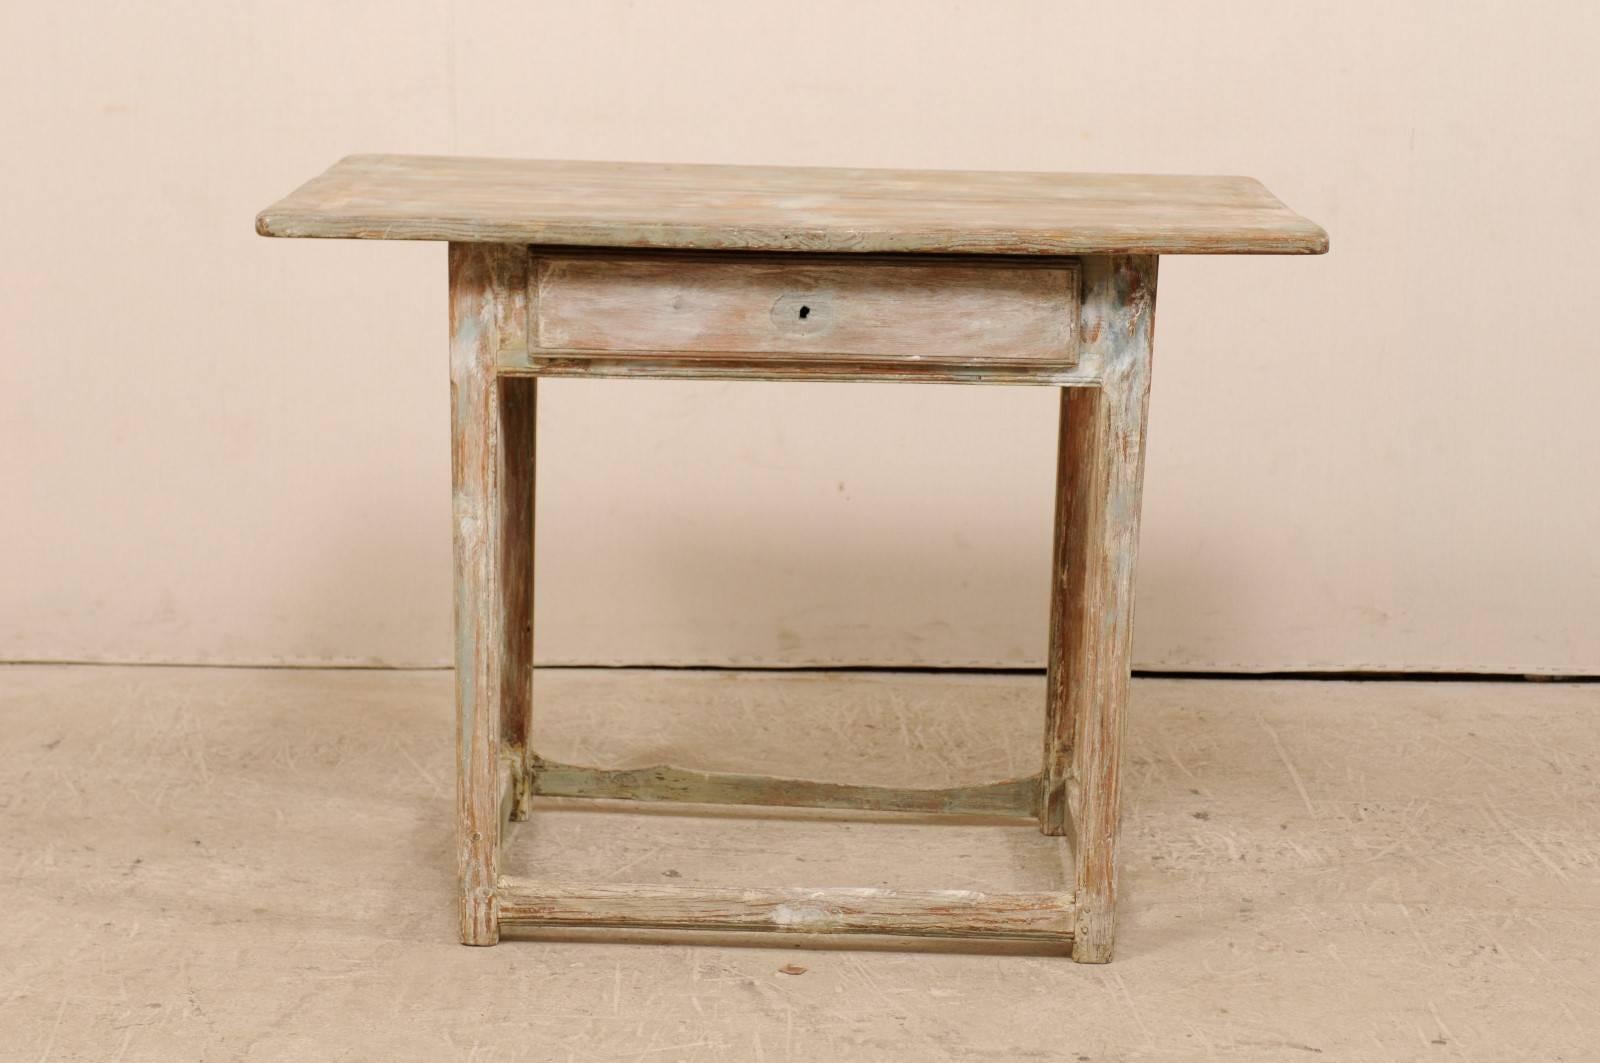 A period Gustavian Swedish fir wood side table. This Swedish table from the early 19th century features, simple, clean lines, an over-hung and rectangular-shaped top, and single drawer. This table is raised on four squared legs, and supported with